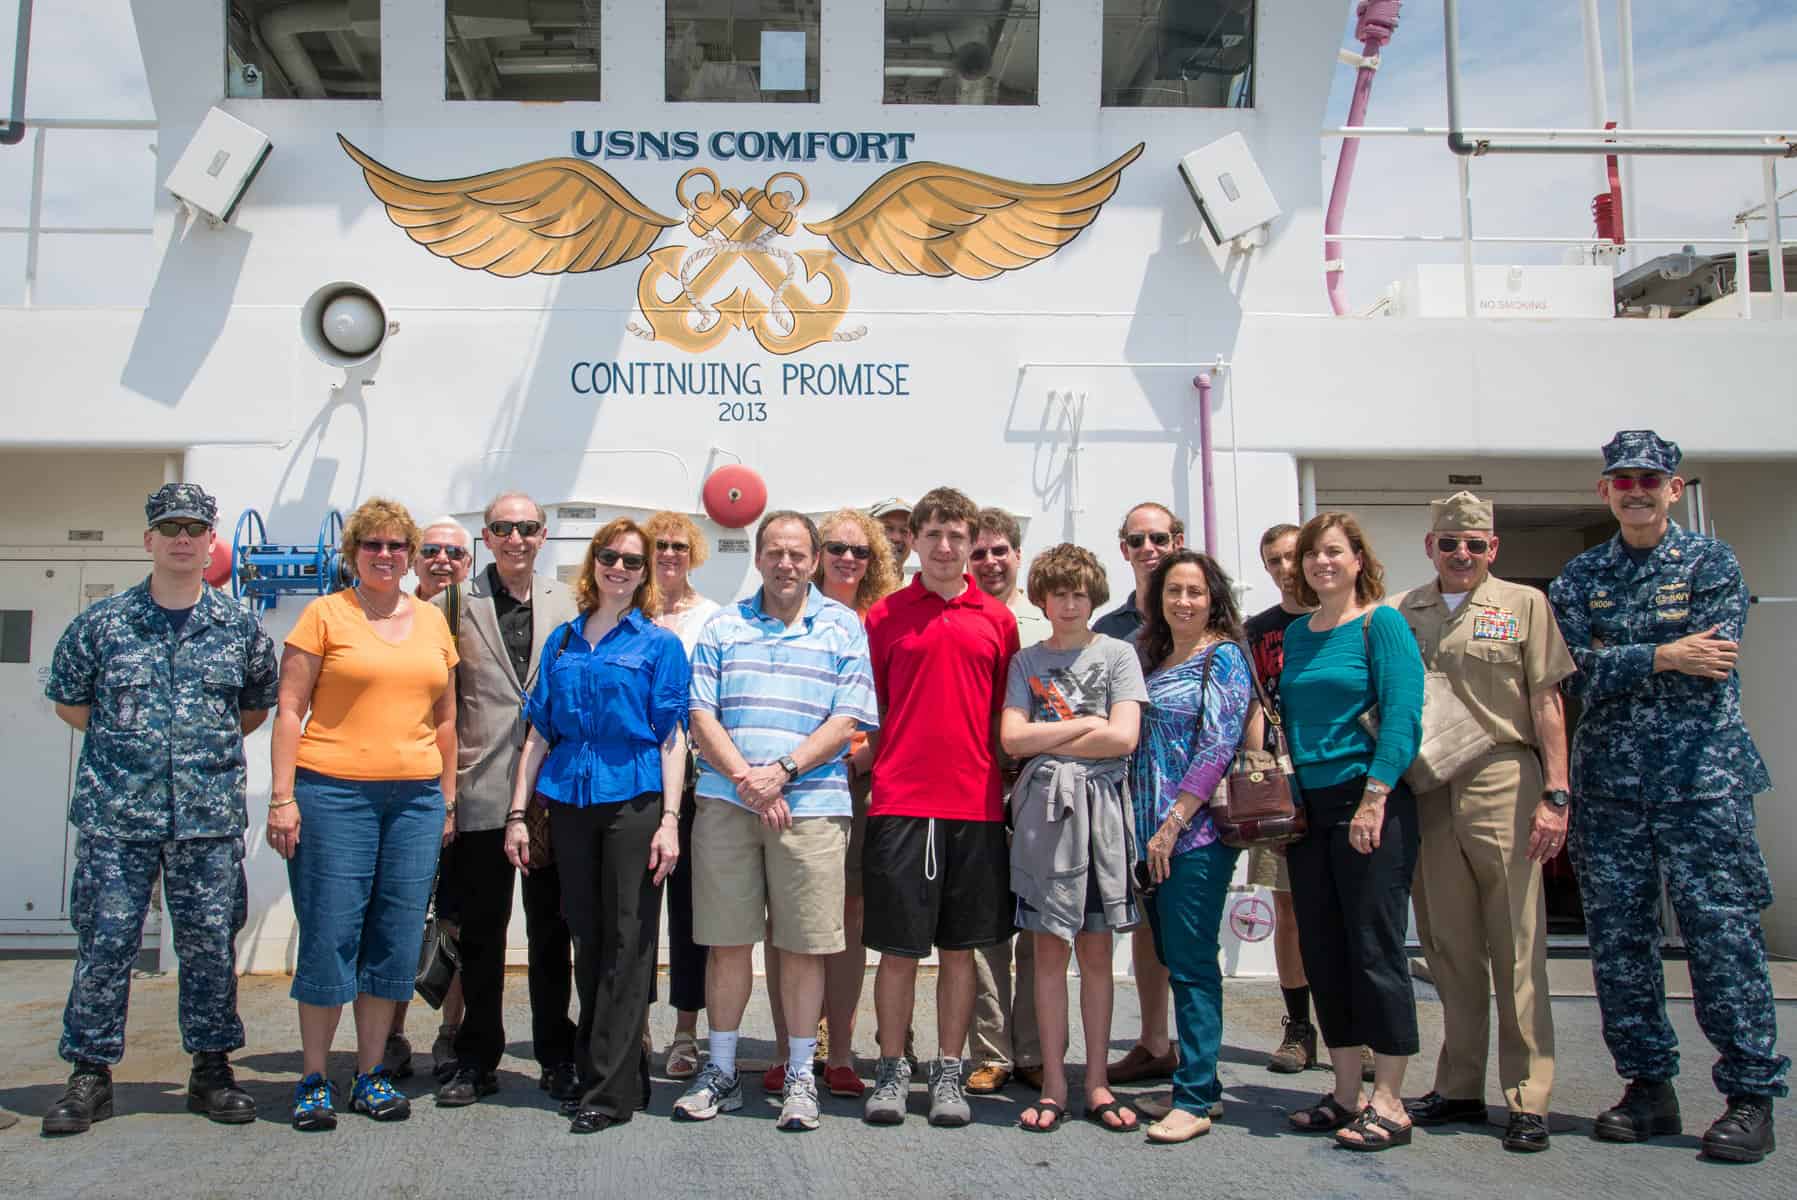 UJFT visitors stand on the upper deck of the USNS Comfort.